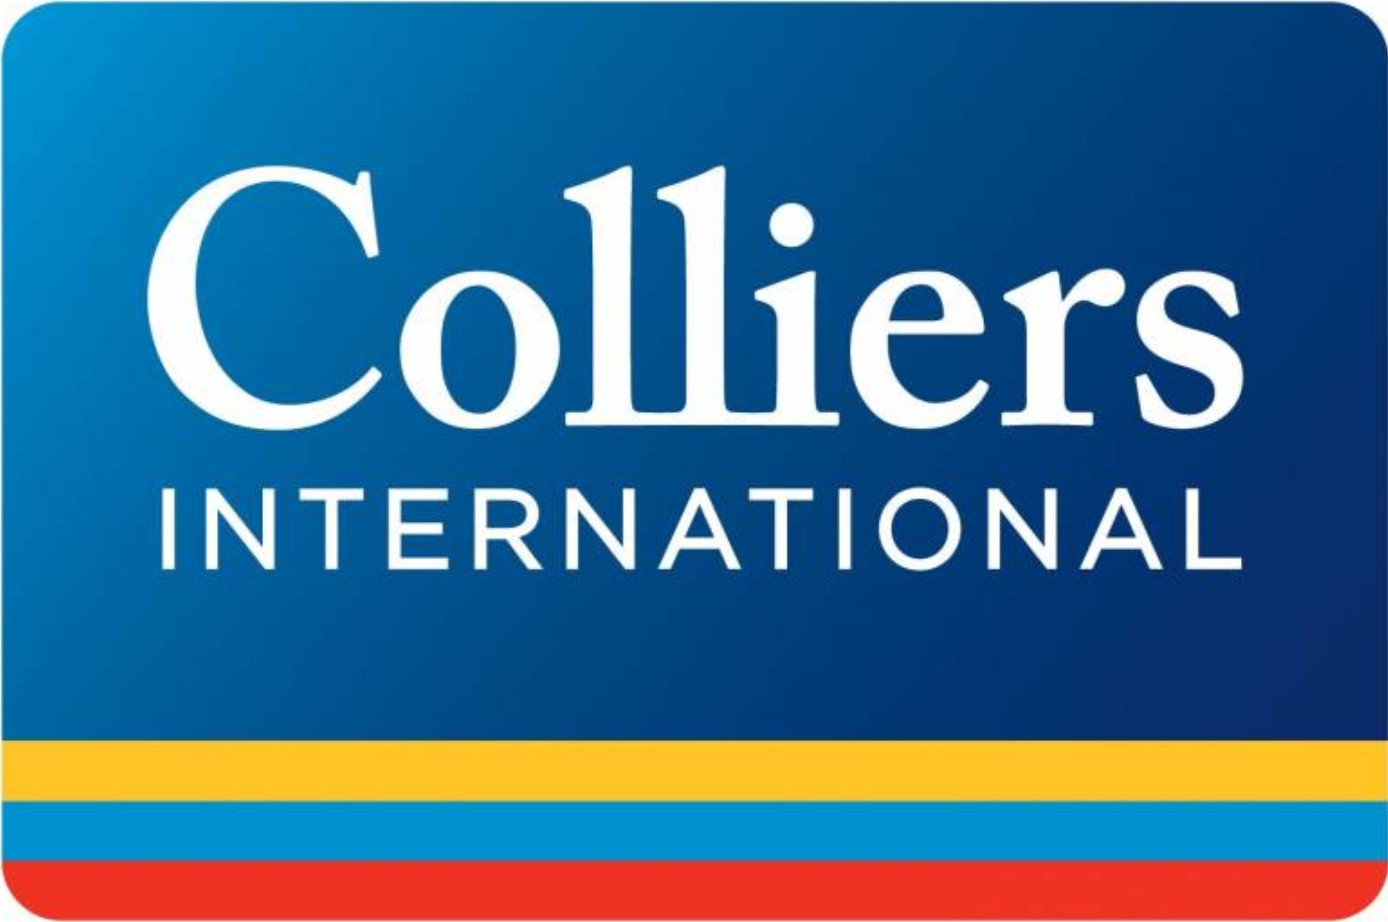 Colliers logo.png (730 KB)